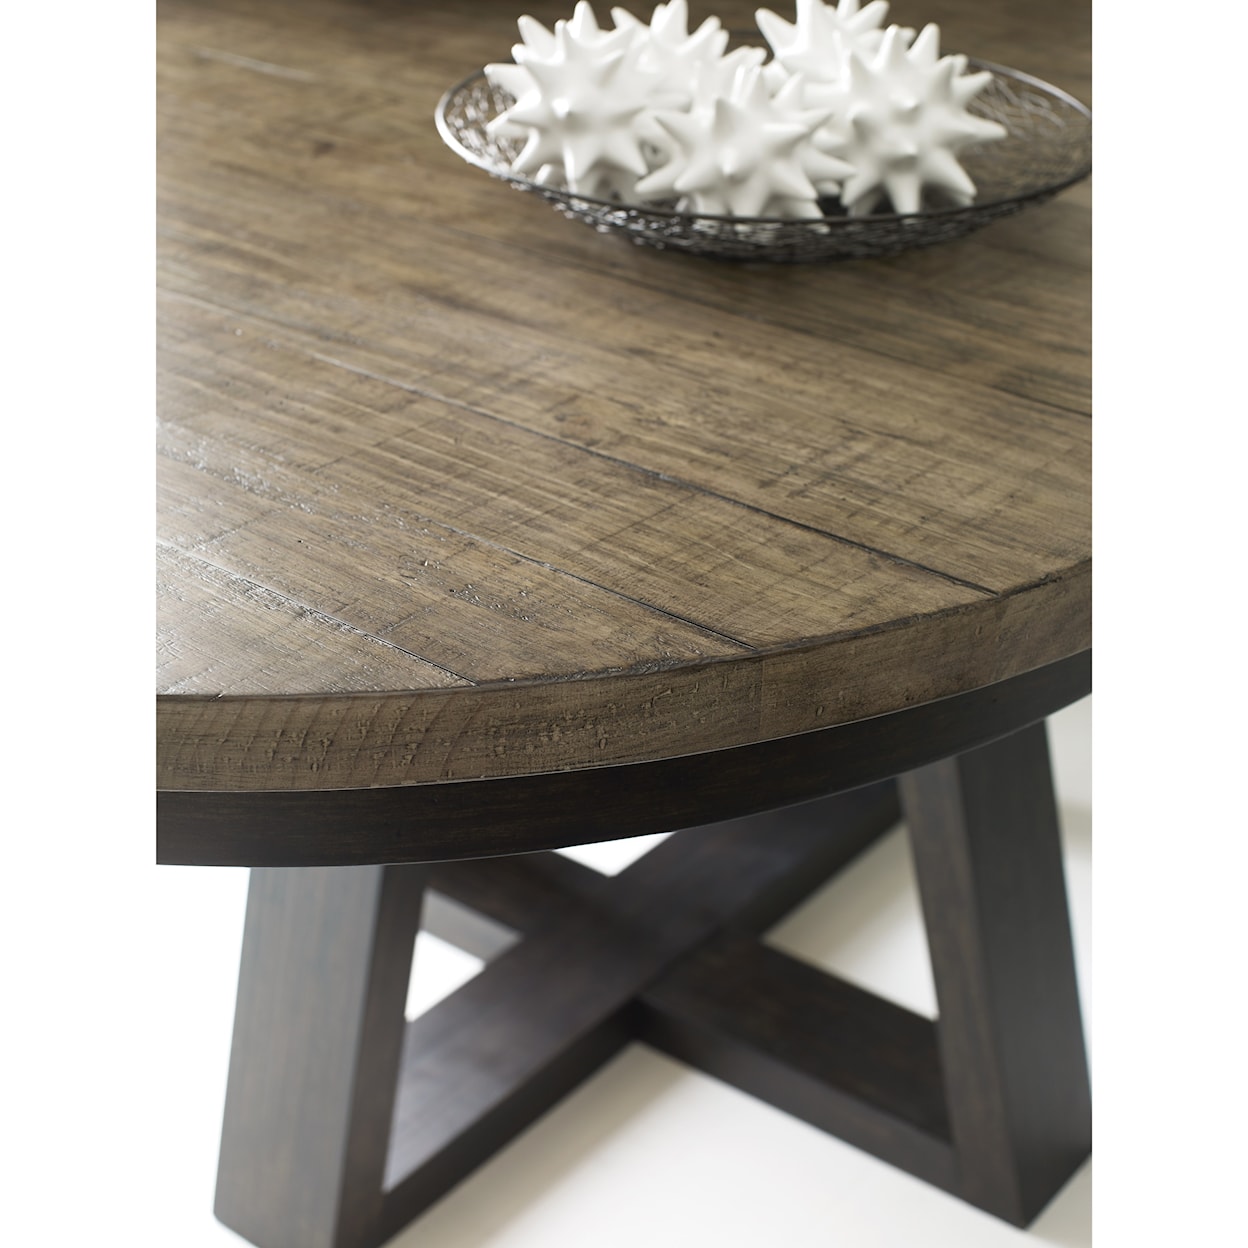 Kincaid Furniture Plank Road Button Dining Table                         